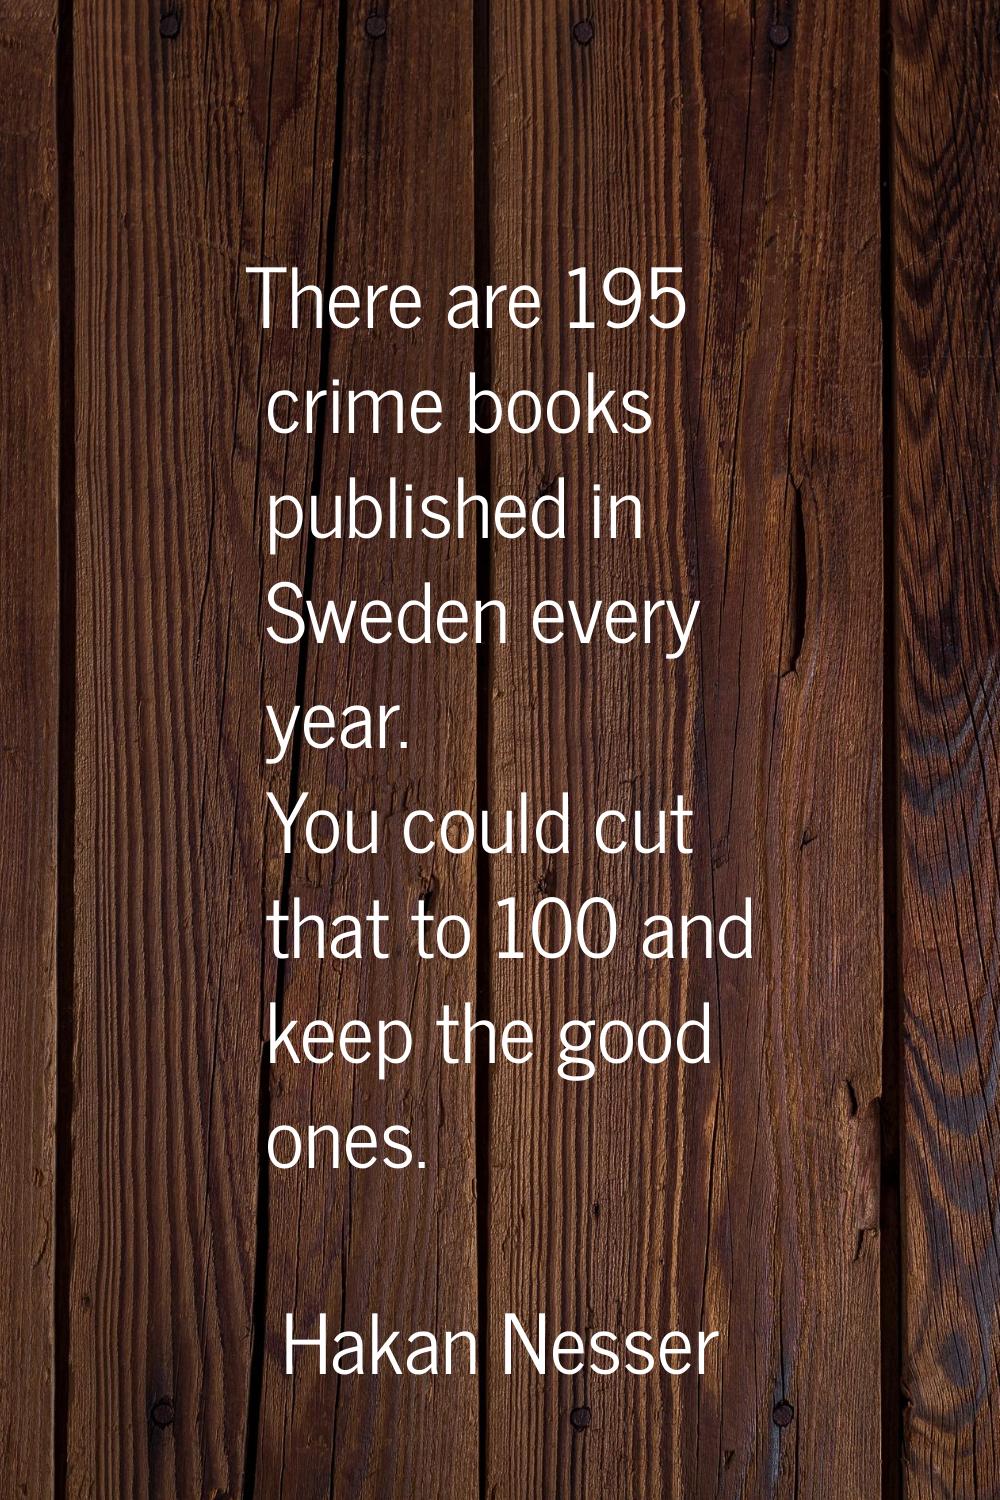 There are 195 crime books published in Sweden every year. You could cut that to 100 and keep the go